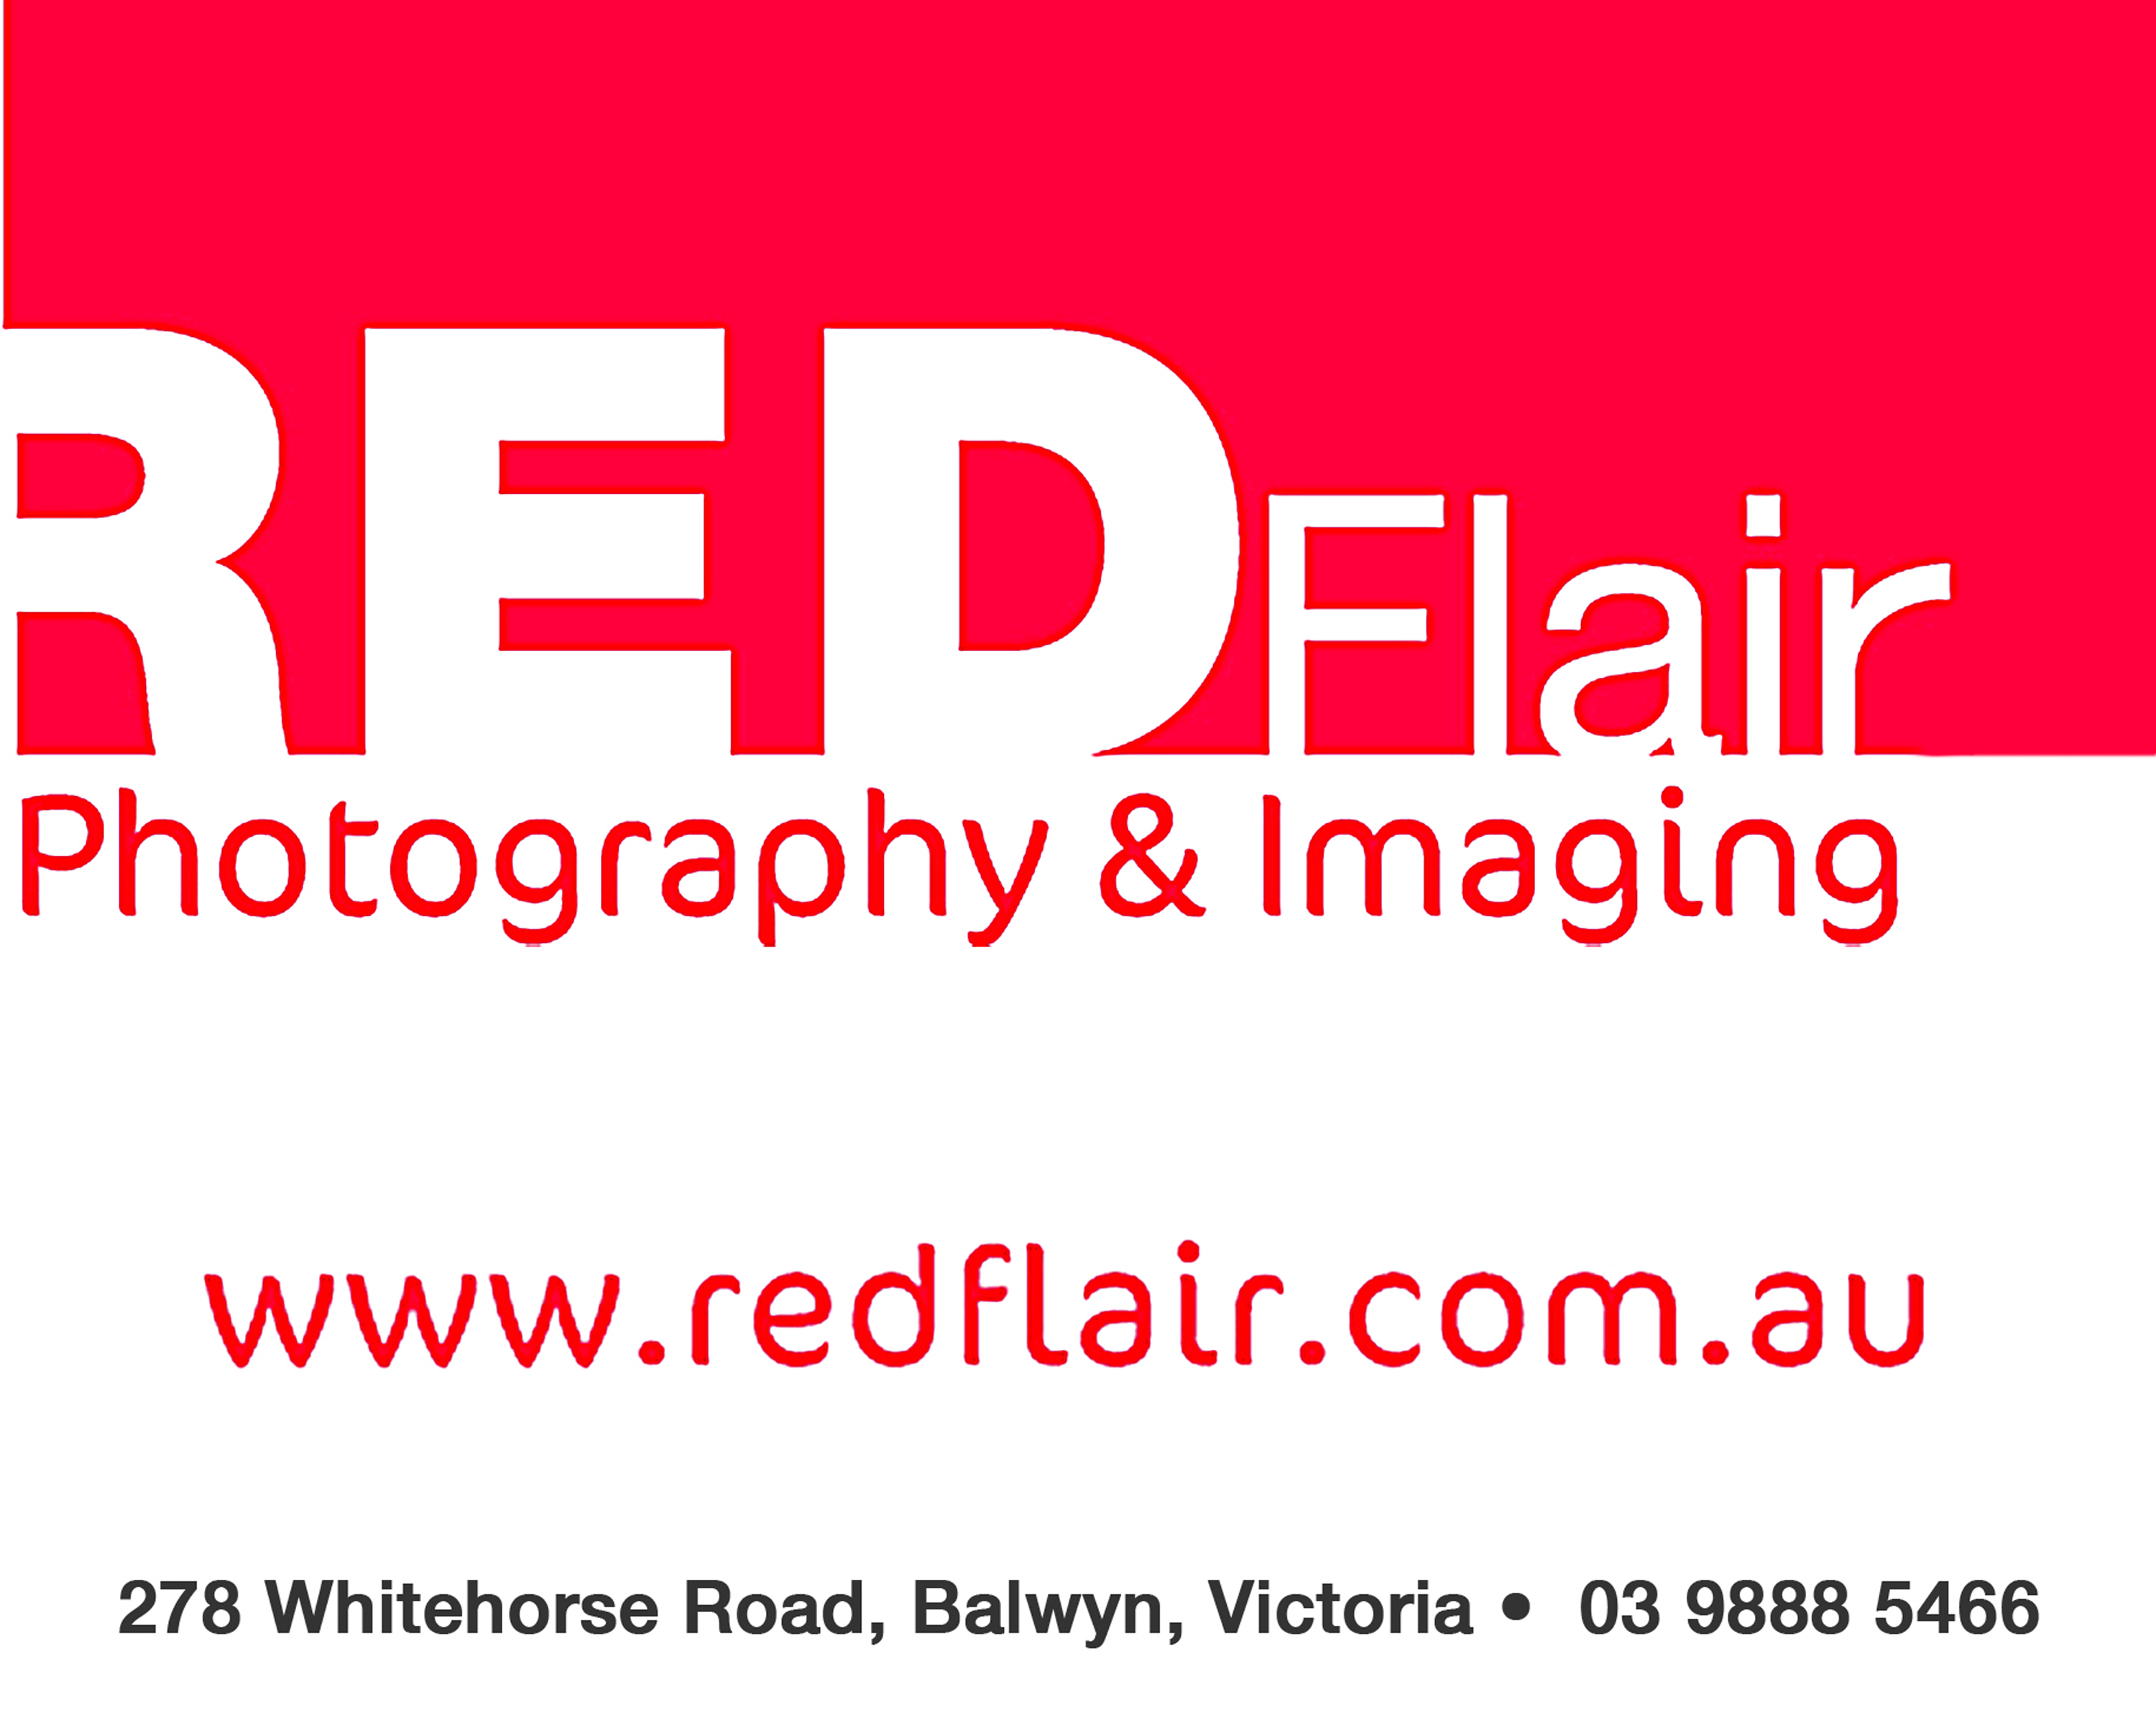 Red Flair Photography & Imaging